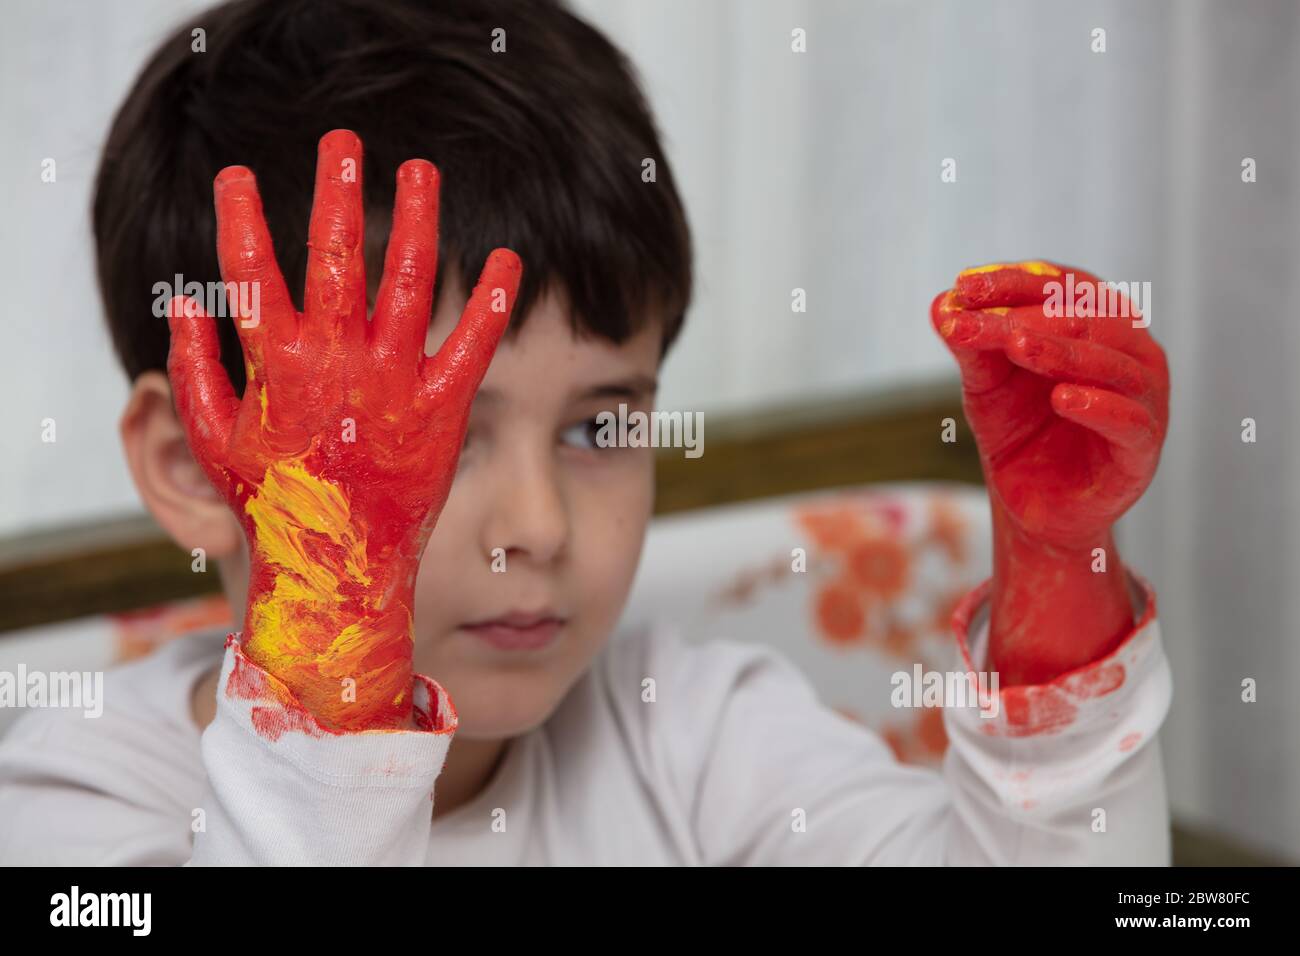 Close up young boy painting with colorful hands. Art, creativity and painting concept Stock Photo